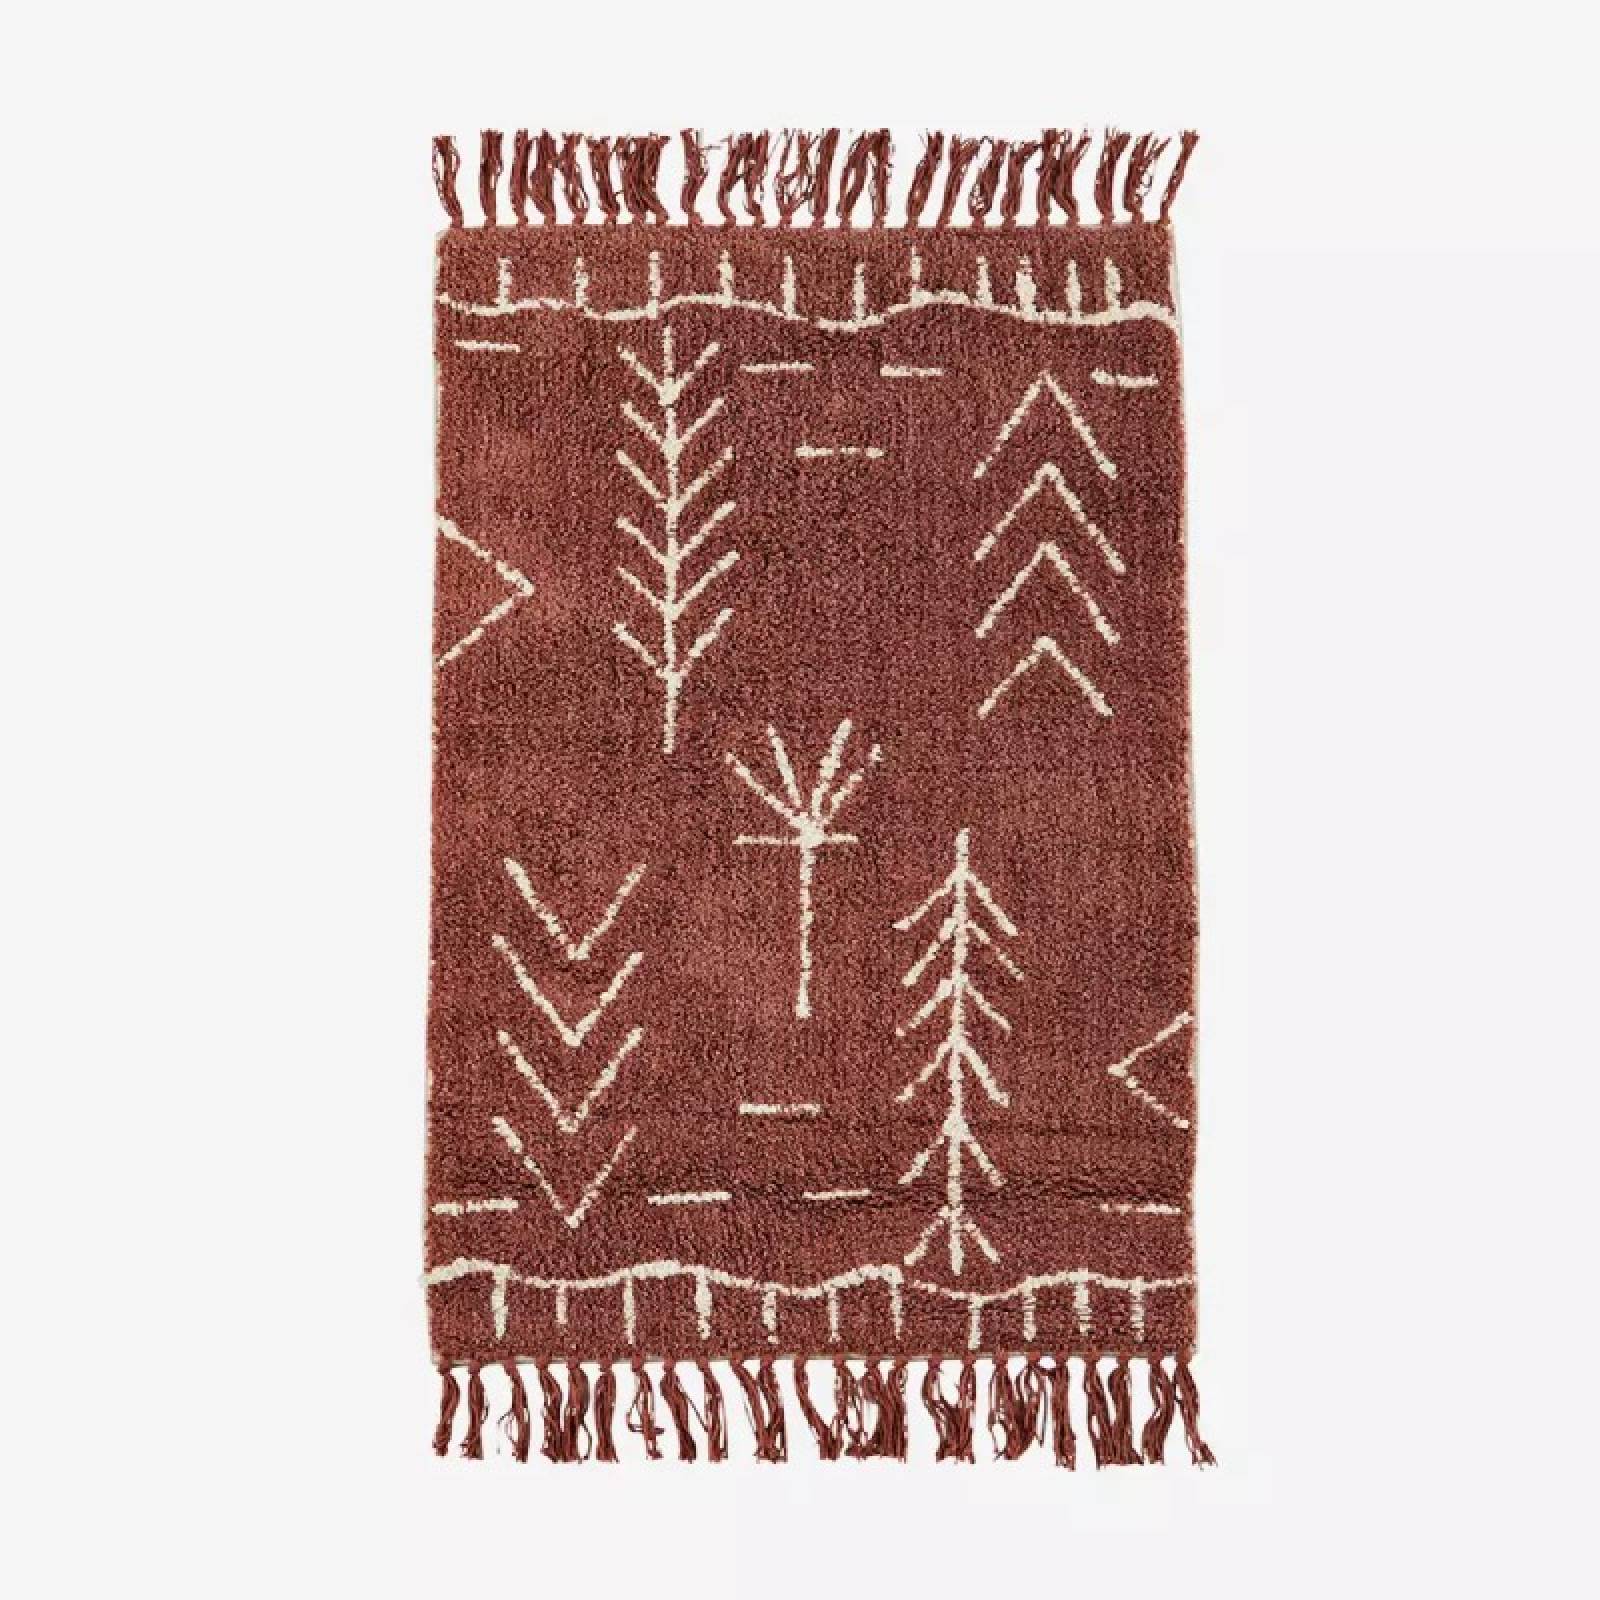 Patterned Bath Mat With Tassels In Copper Brown thumbnails